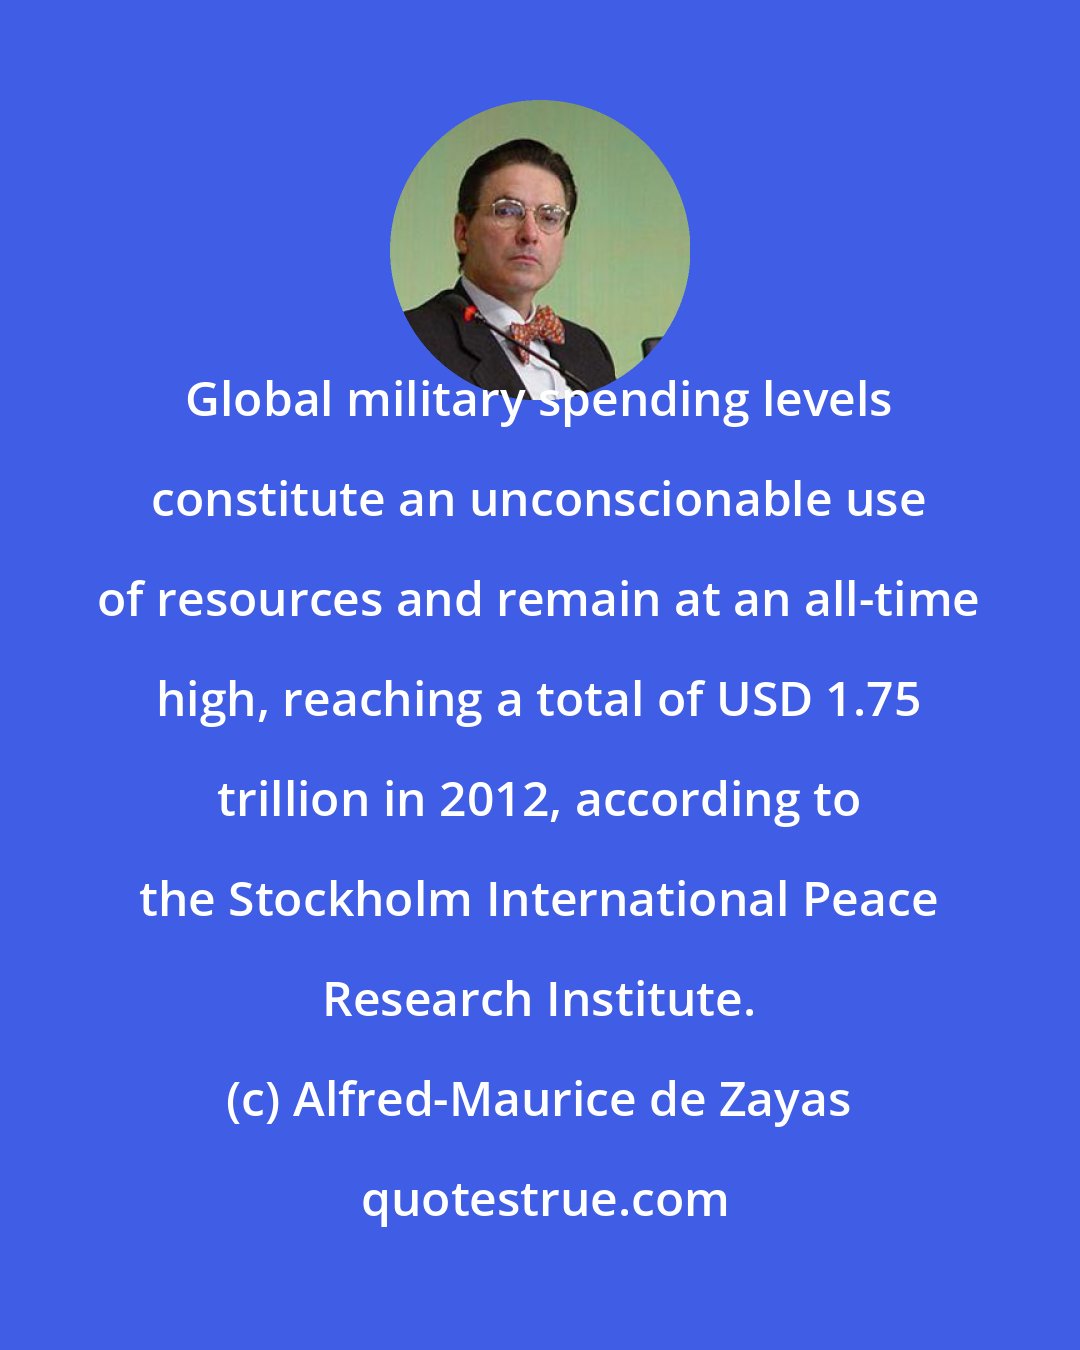 Alfred-Maurice de Zayas: Global military spending levels constitute an unconscionable use of resources and remain at an all-time high, reaching a total of USD 1.75 trillion in 2012, according to the Stockholm International Peace Research Institute.